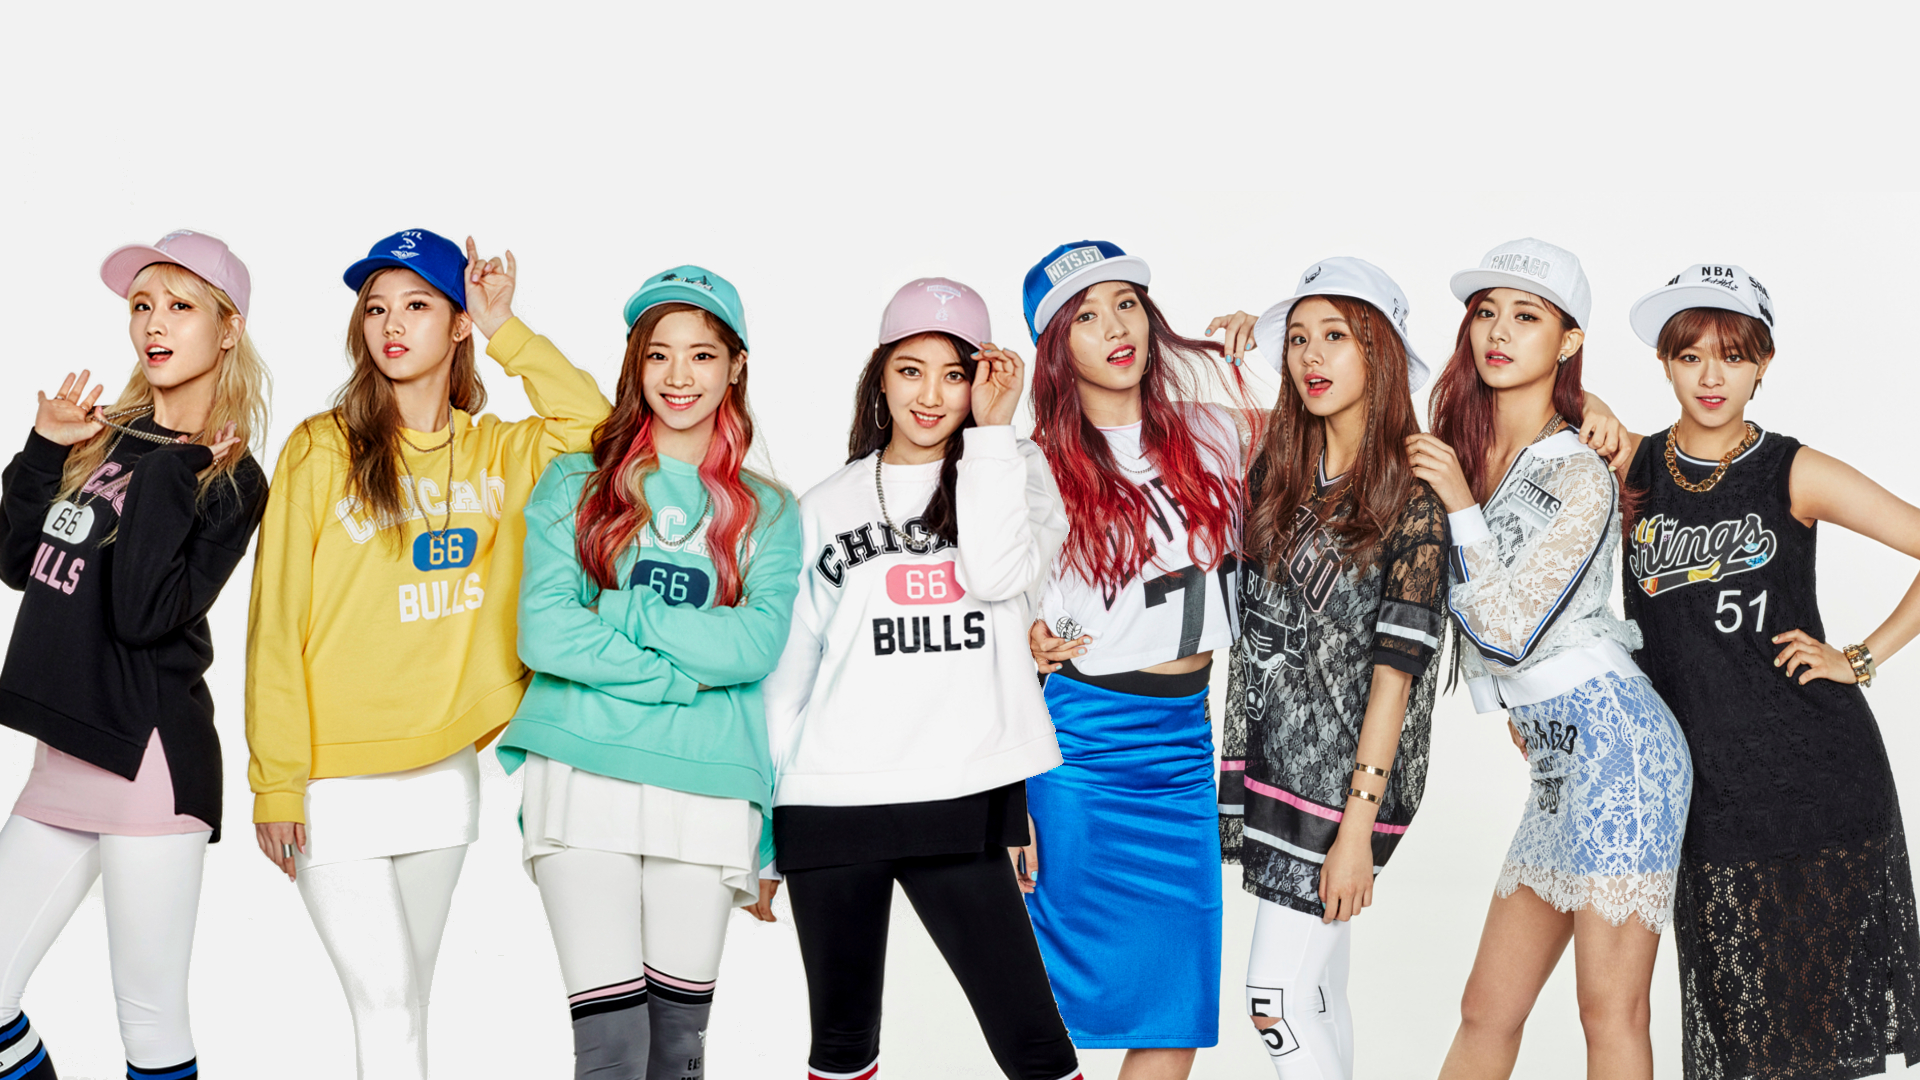 Twice Jyp Ent Image HD Wallpaper And Background Photos